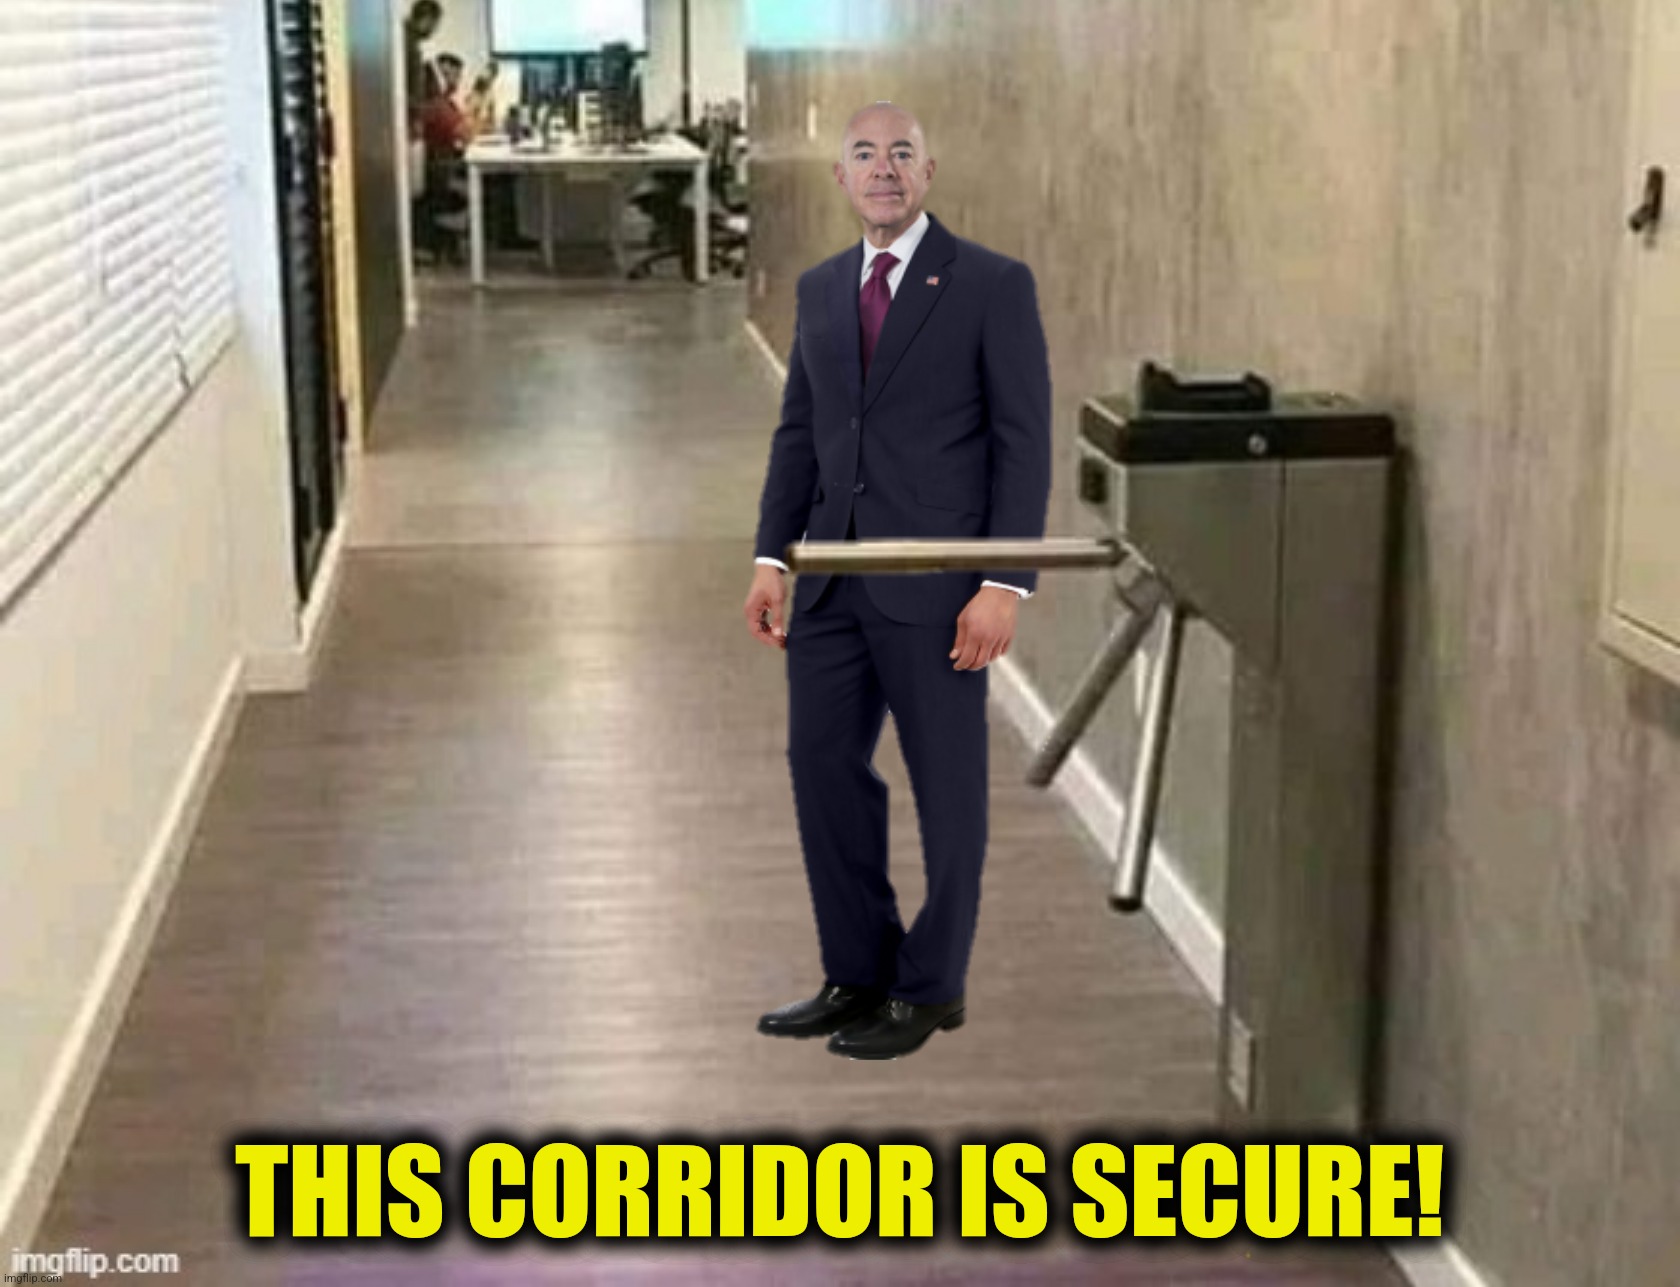 THIS CORRIDOR IS SECURE! | made w/ Imgflip meme maker